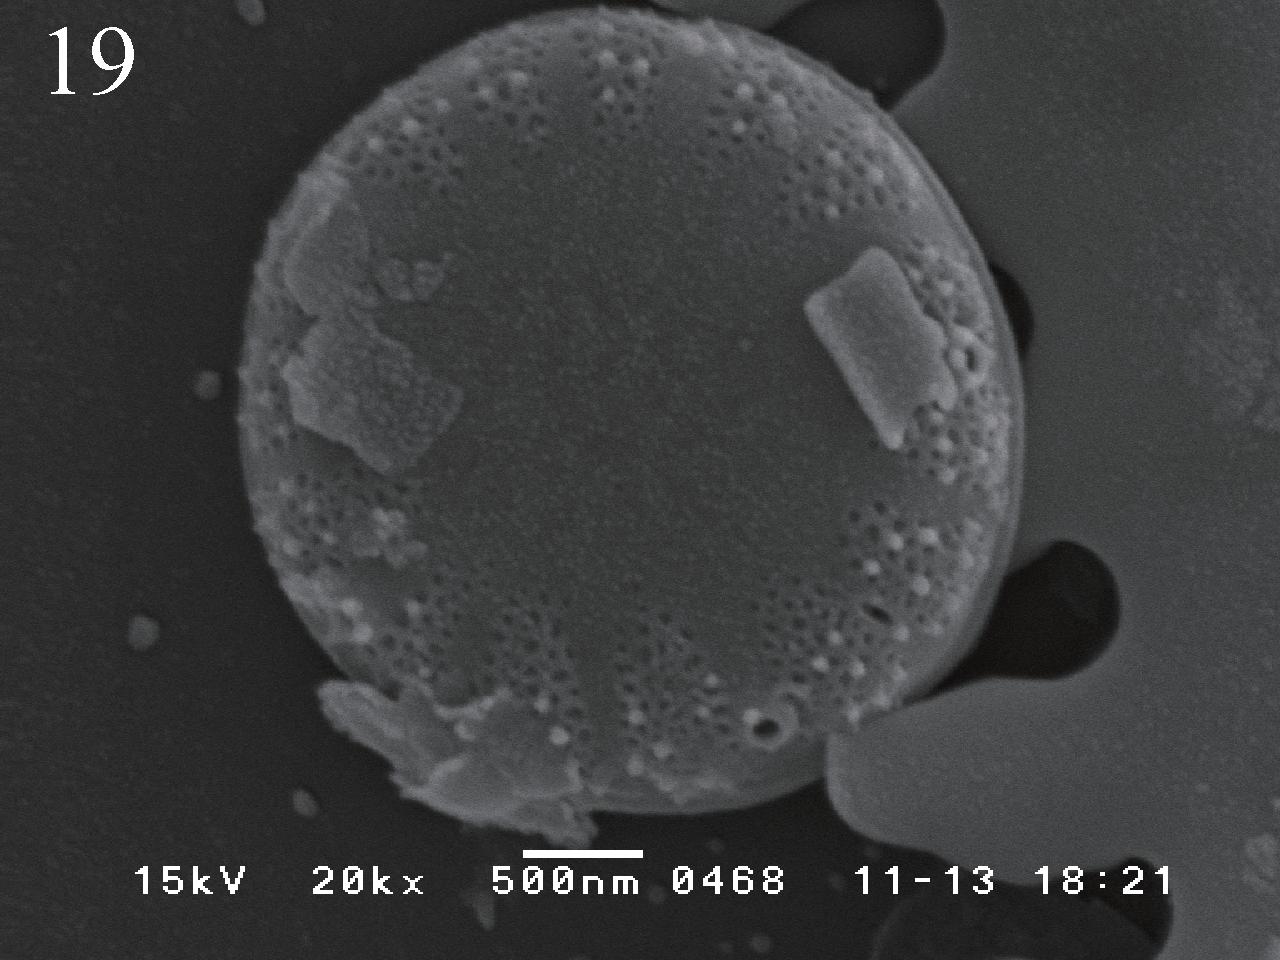 Cyclotella atomus var. marina SEM photos; showing various morphology of external valve. Each scale is shown in each photo.